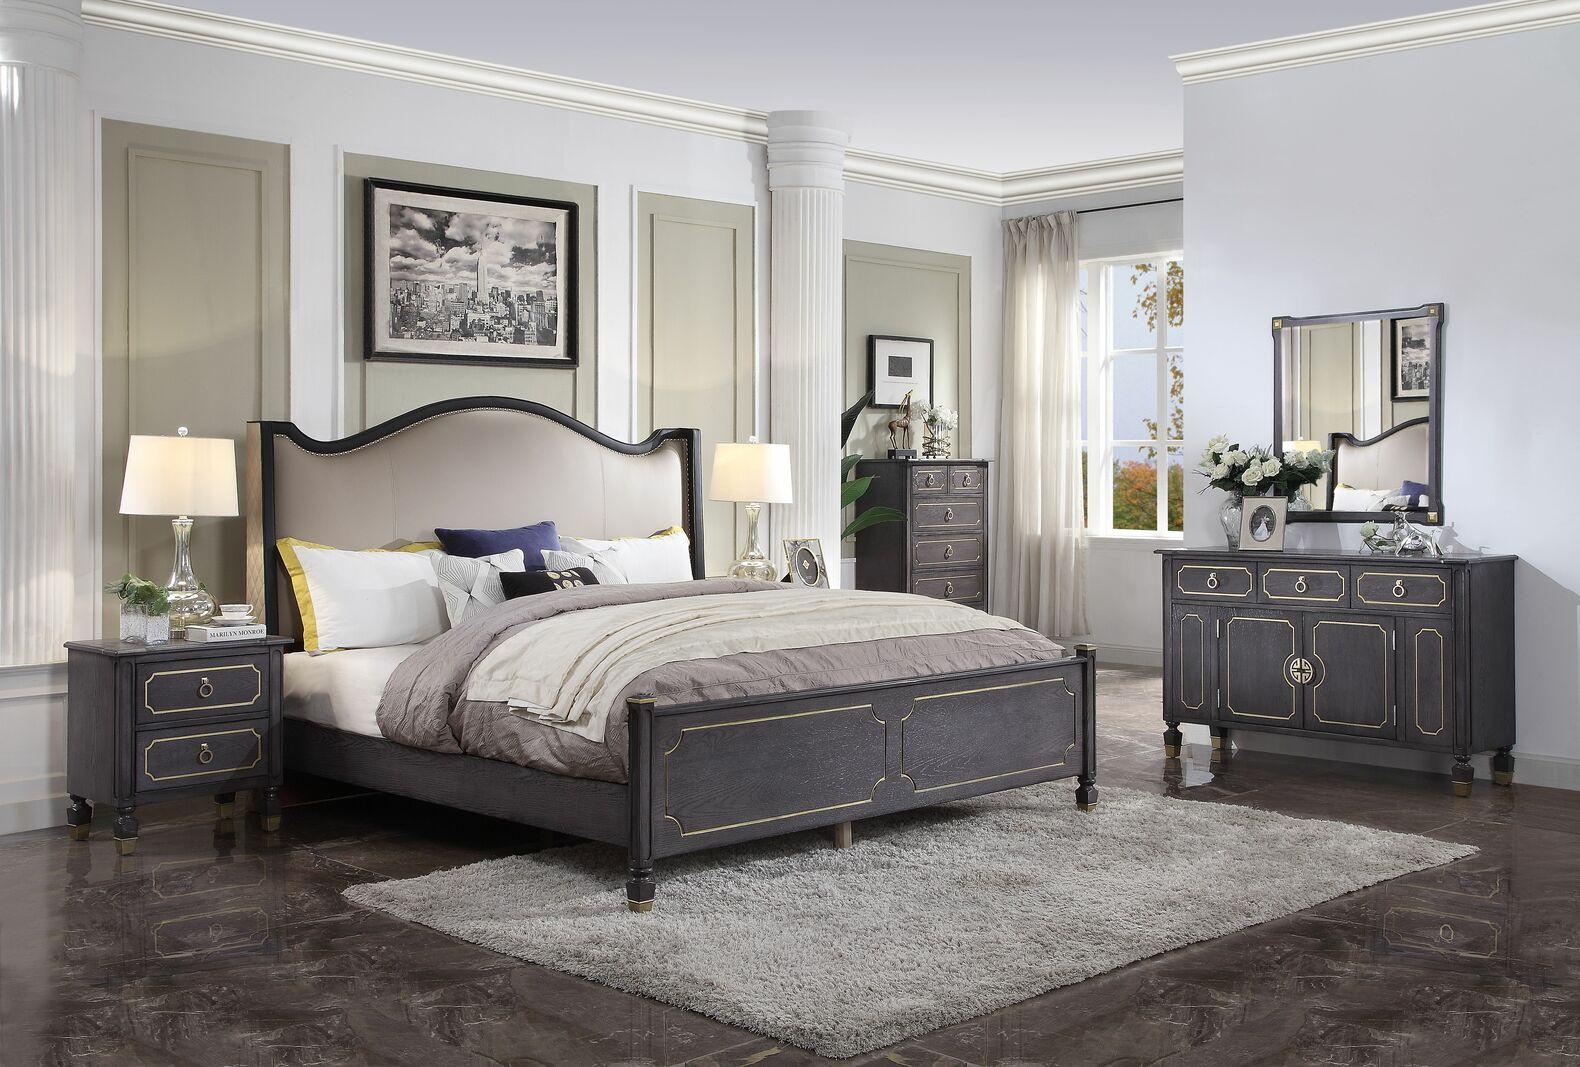 

    
Classic Tan & Tobacco California King 6pcs Bedroom Set by Acme House Marchese 28894CK-6pcs
